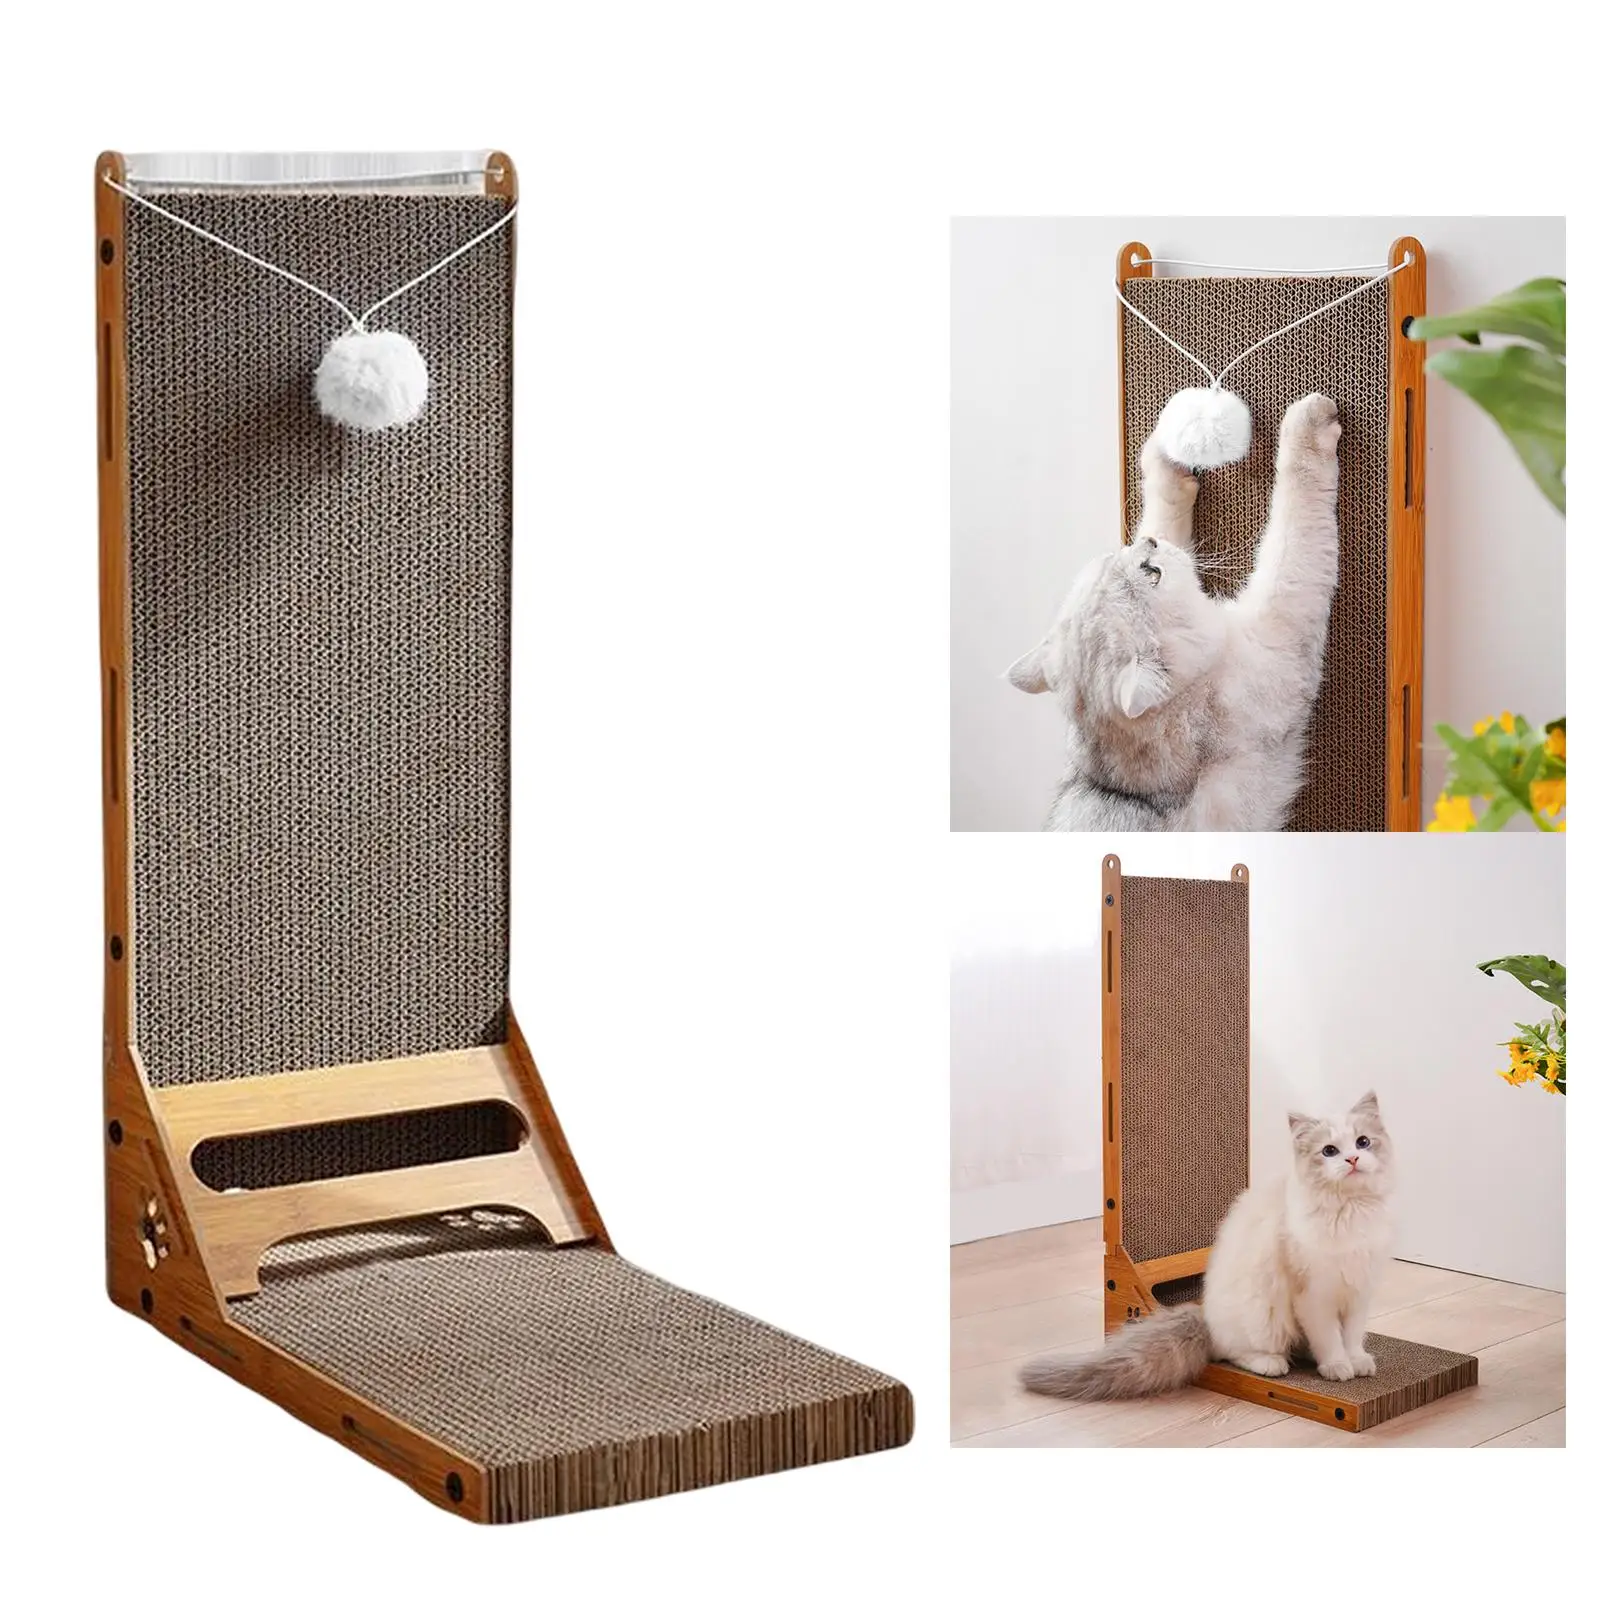 Durable Vertical Cat Scratcher Lounge Bed Home Decor with Ball Cardboard Scratch Pad Standing Scratching Board for Kitty Kitten